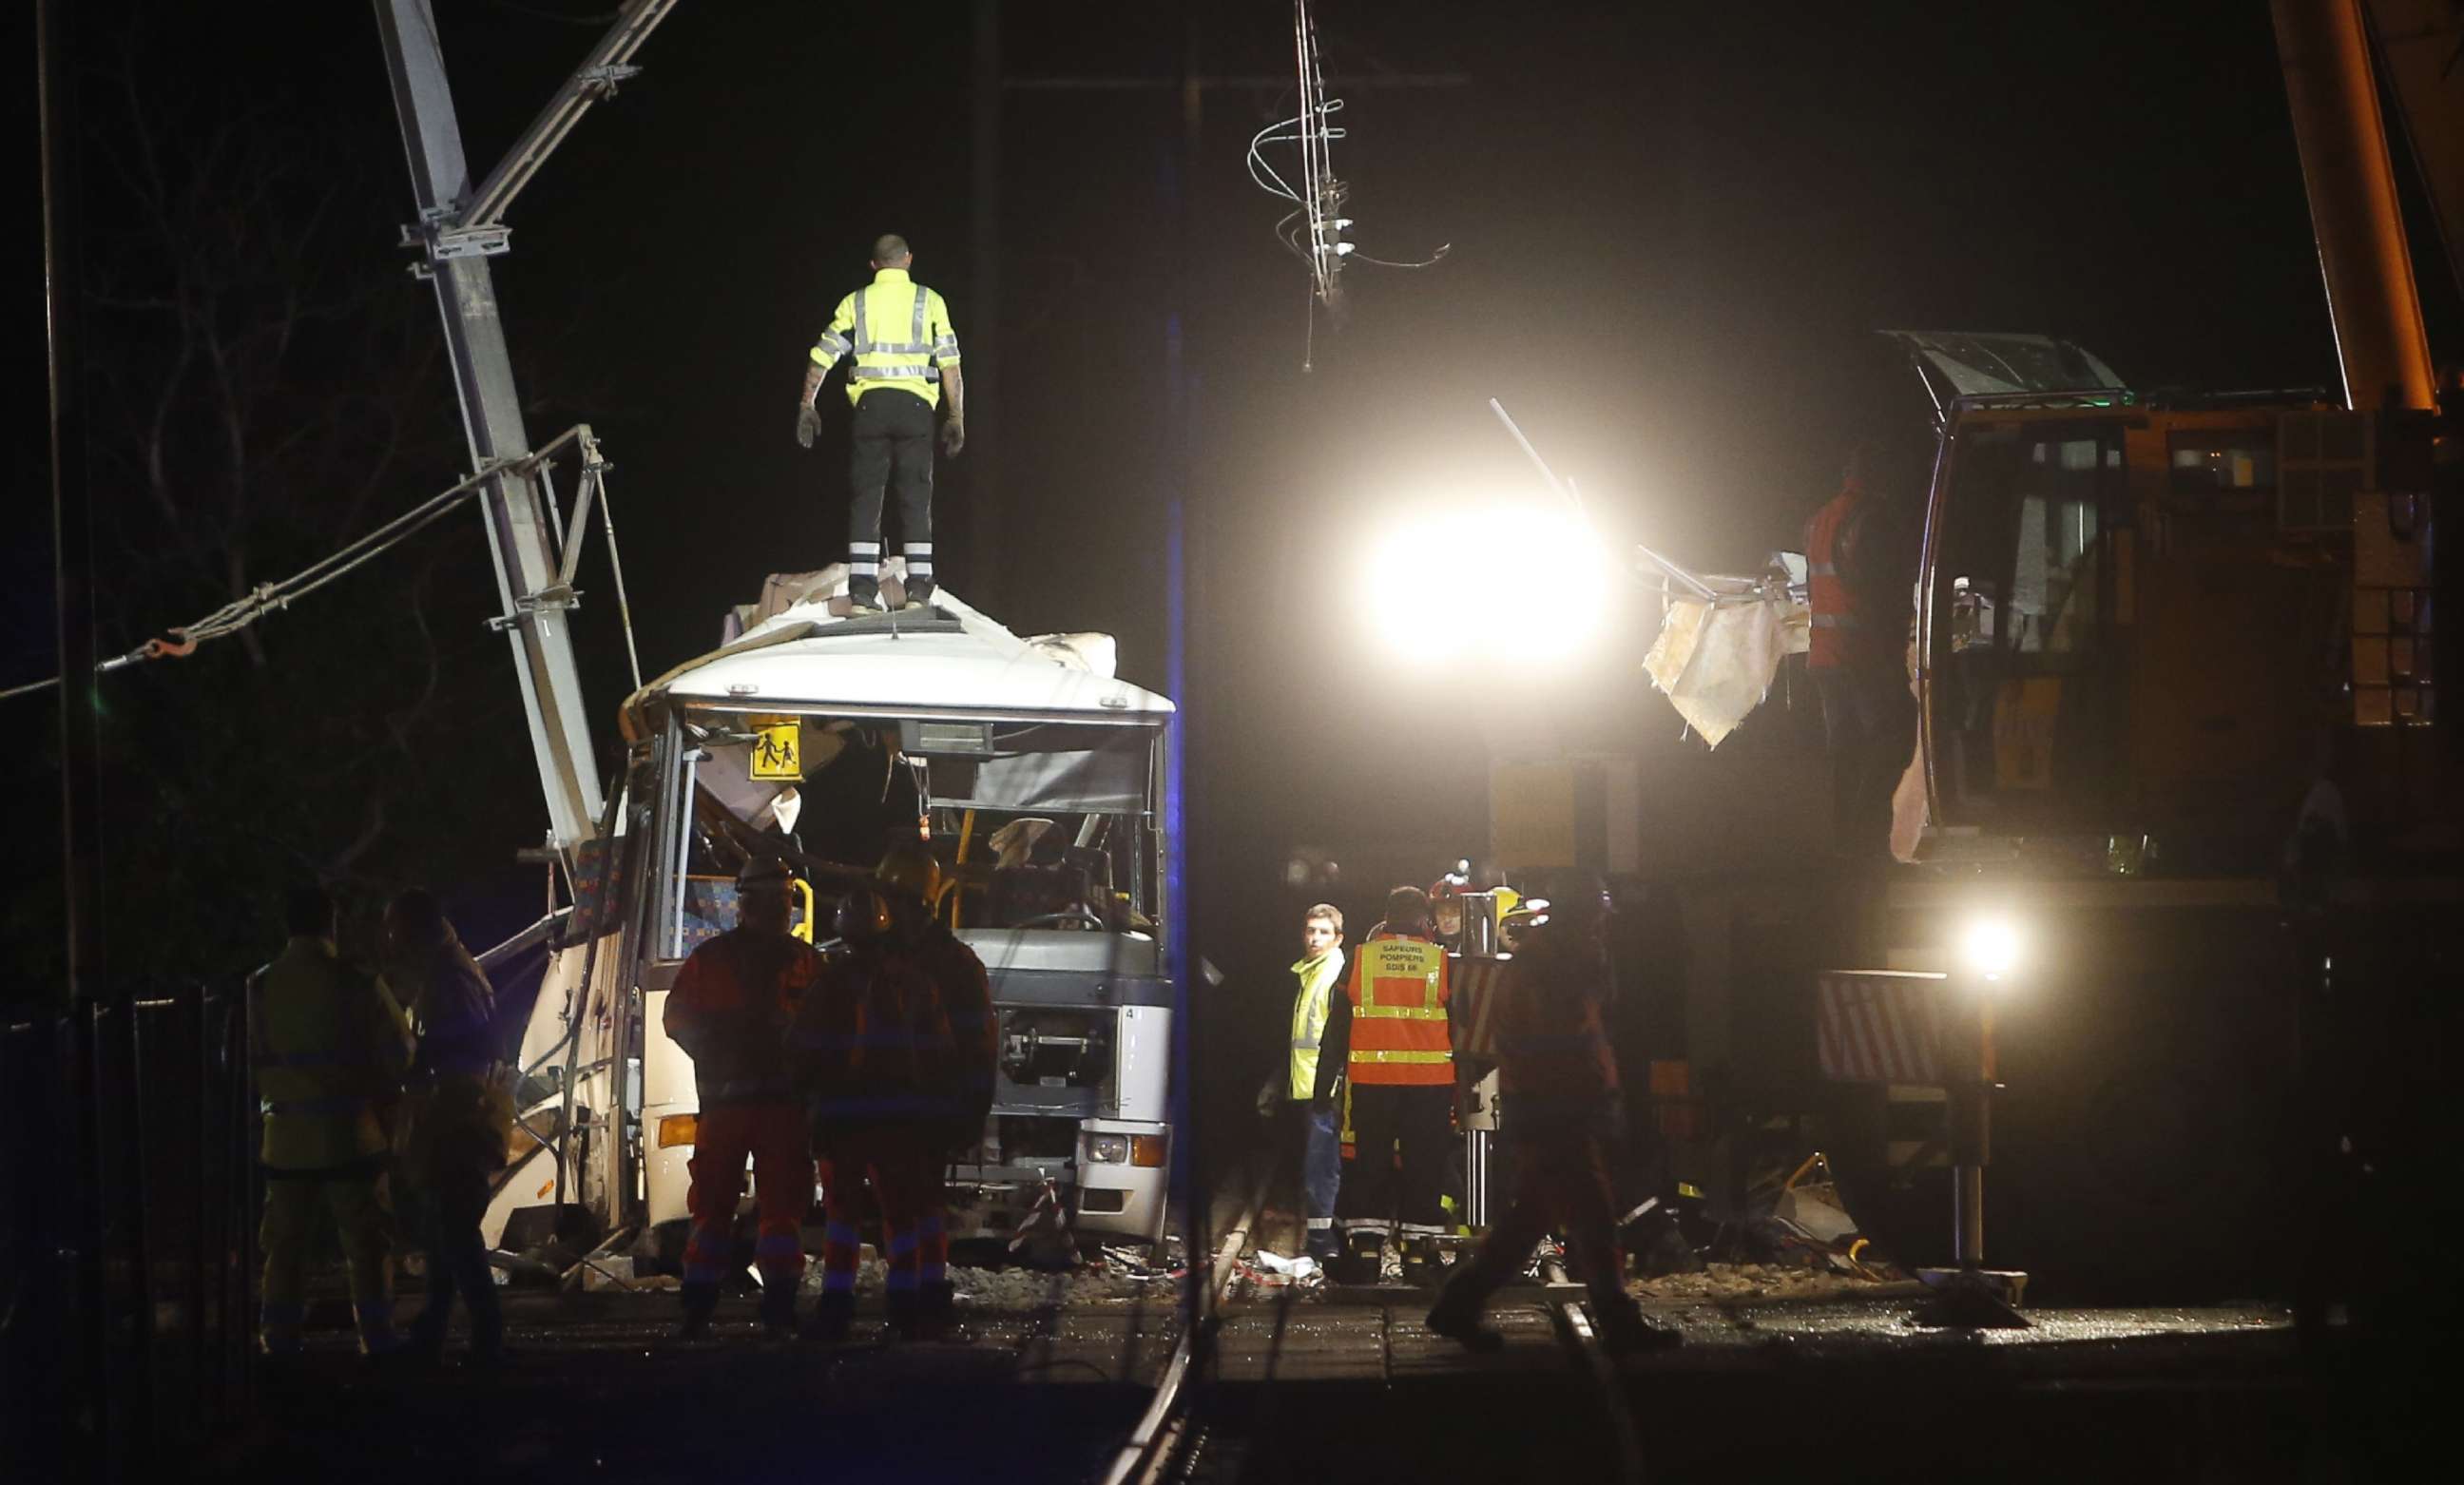 PHOTO: Firefighters and police work at the site of an accident in Millas, near Perpignan, southern France, on Dec. 14, 2017, after a train crashed into a school bus at a level crossing.